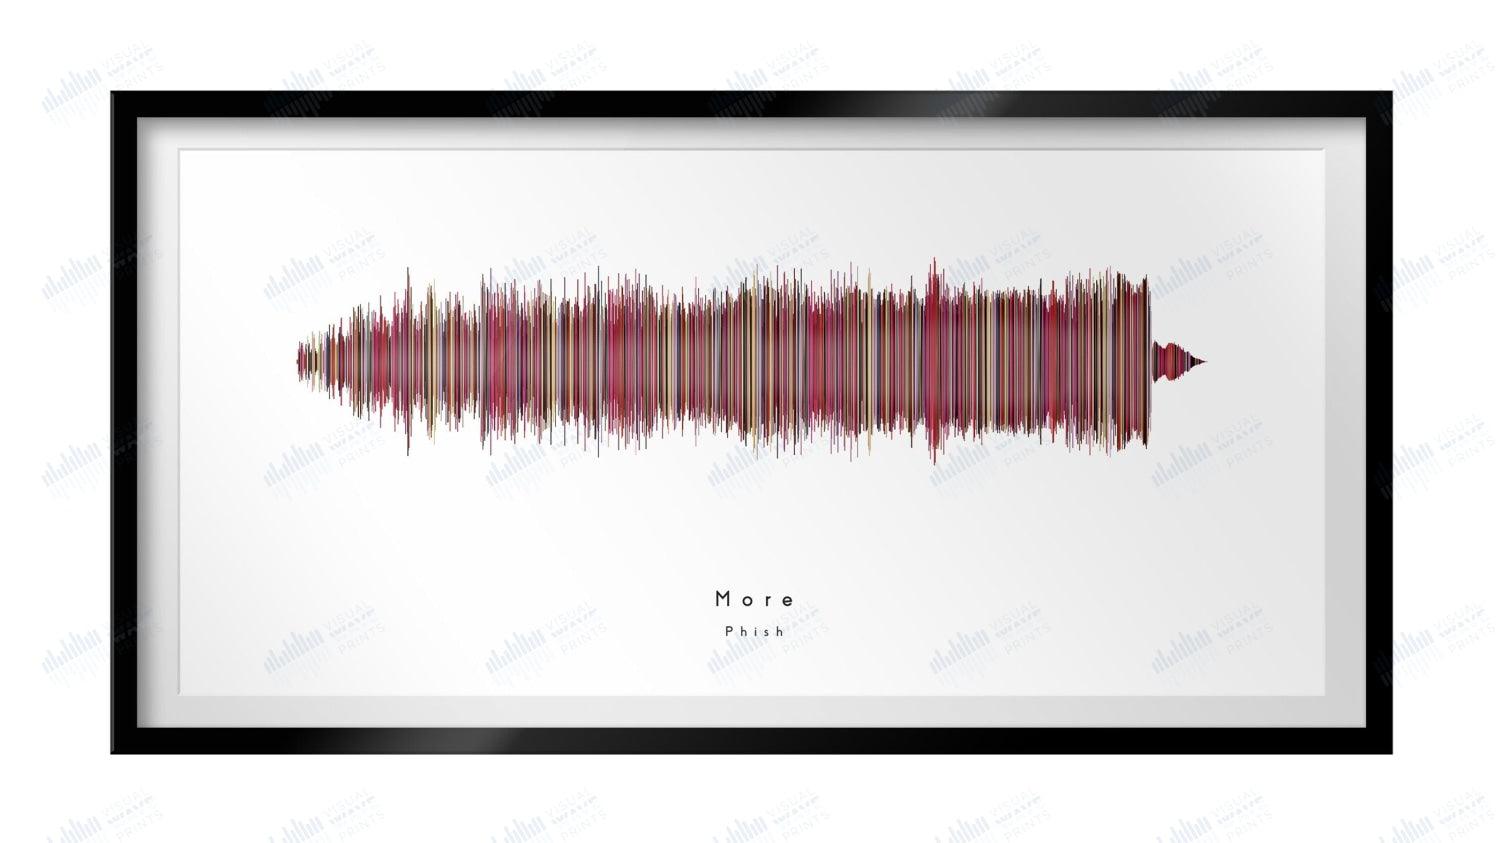 More by Phish - Visual Wave Prints